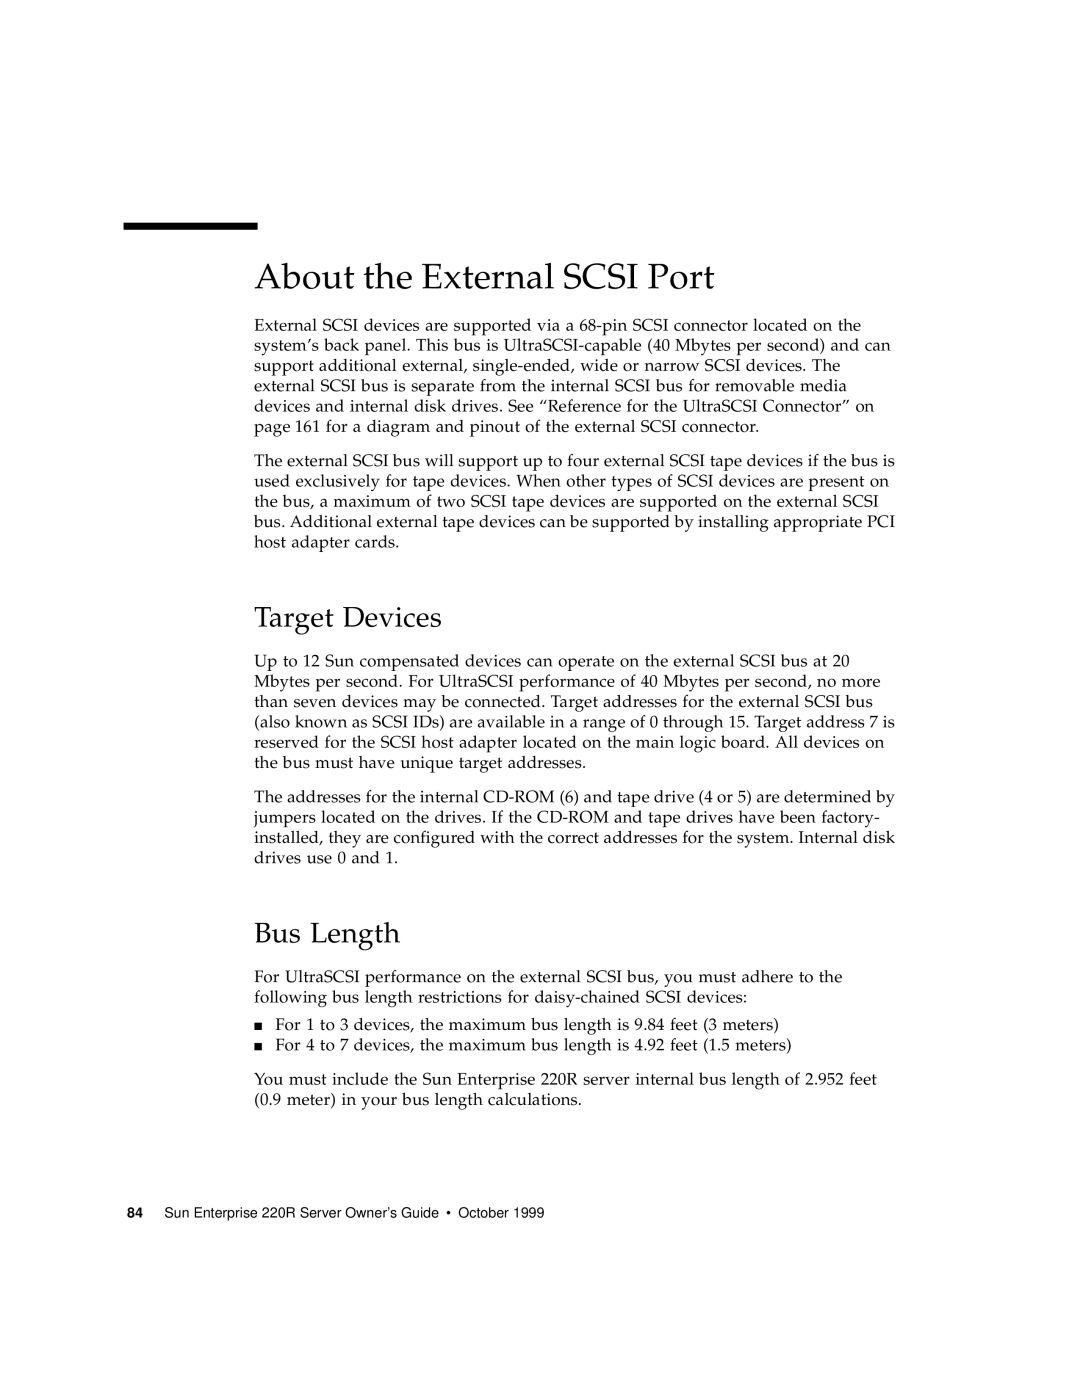 Sun Microsystems 220R manual About the External SCSI Port, Target Devices, Bus Length 